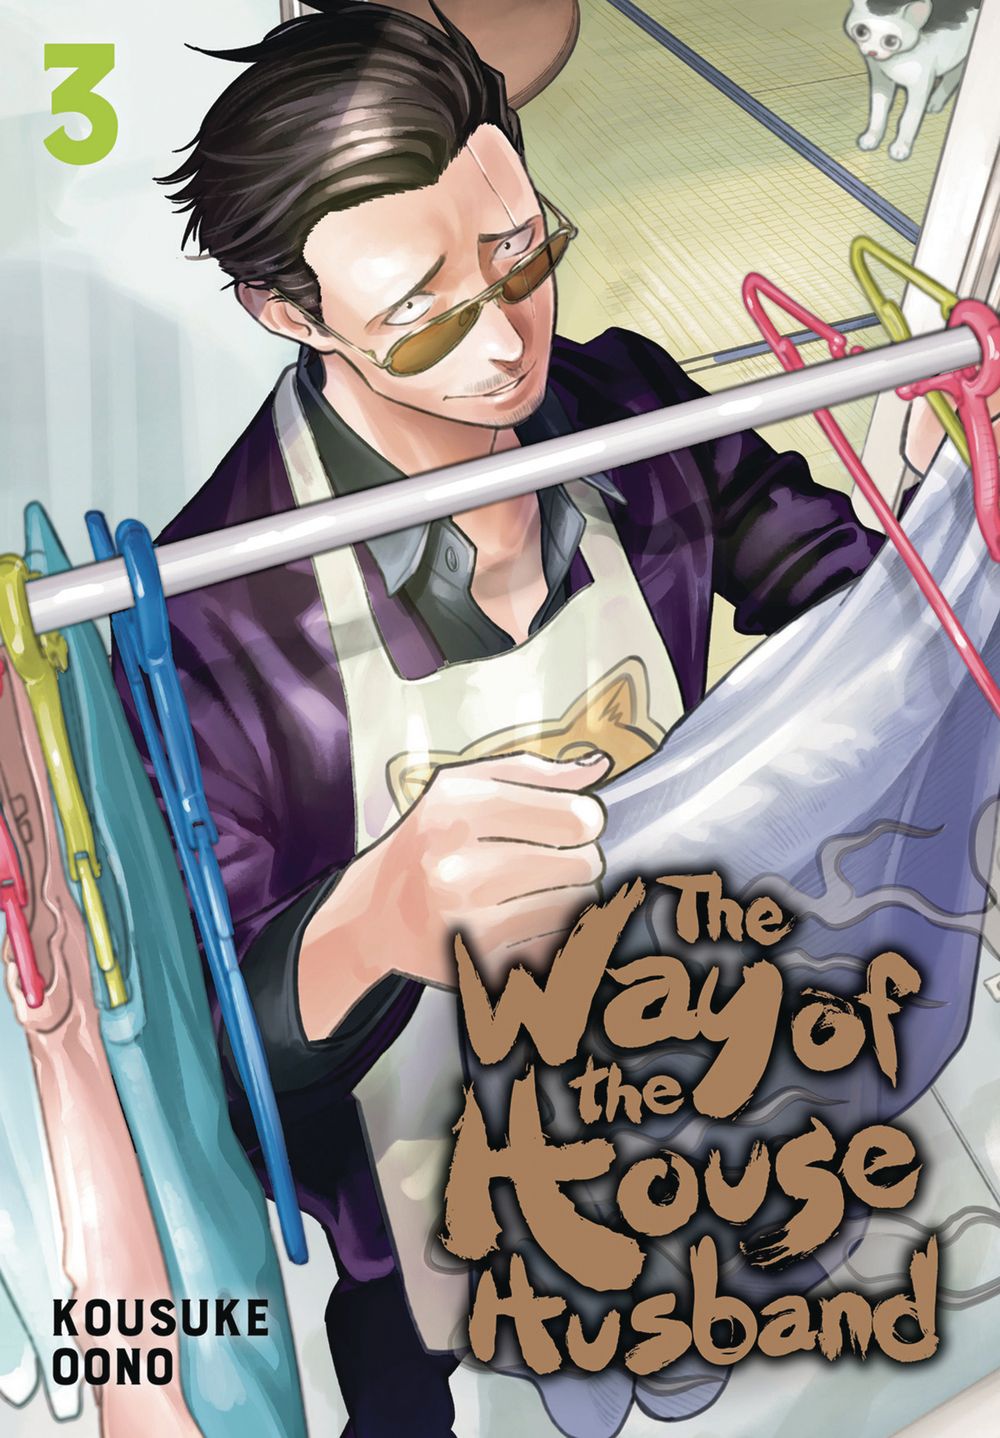 Way Of The Househusband Graphic Novel Volume 03